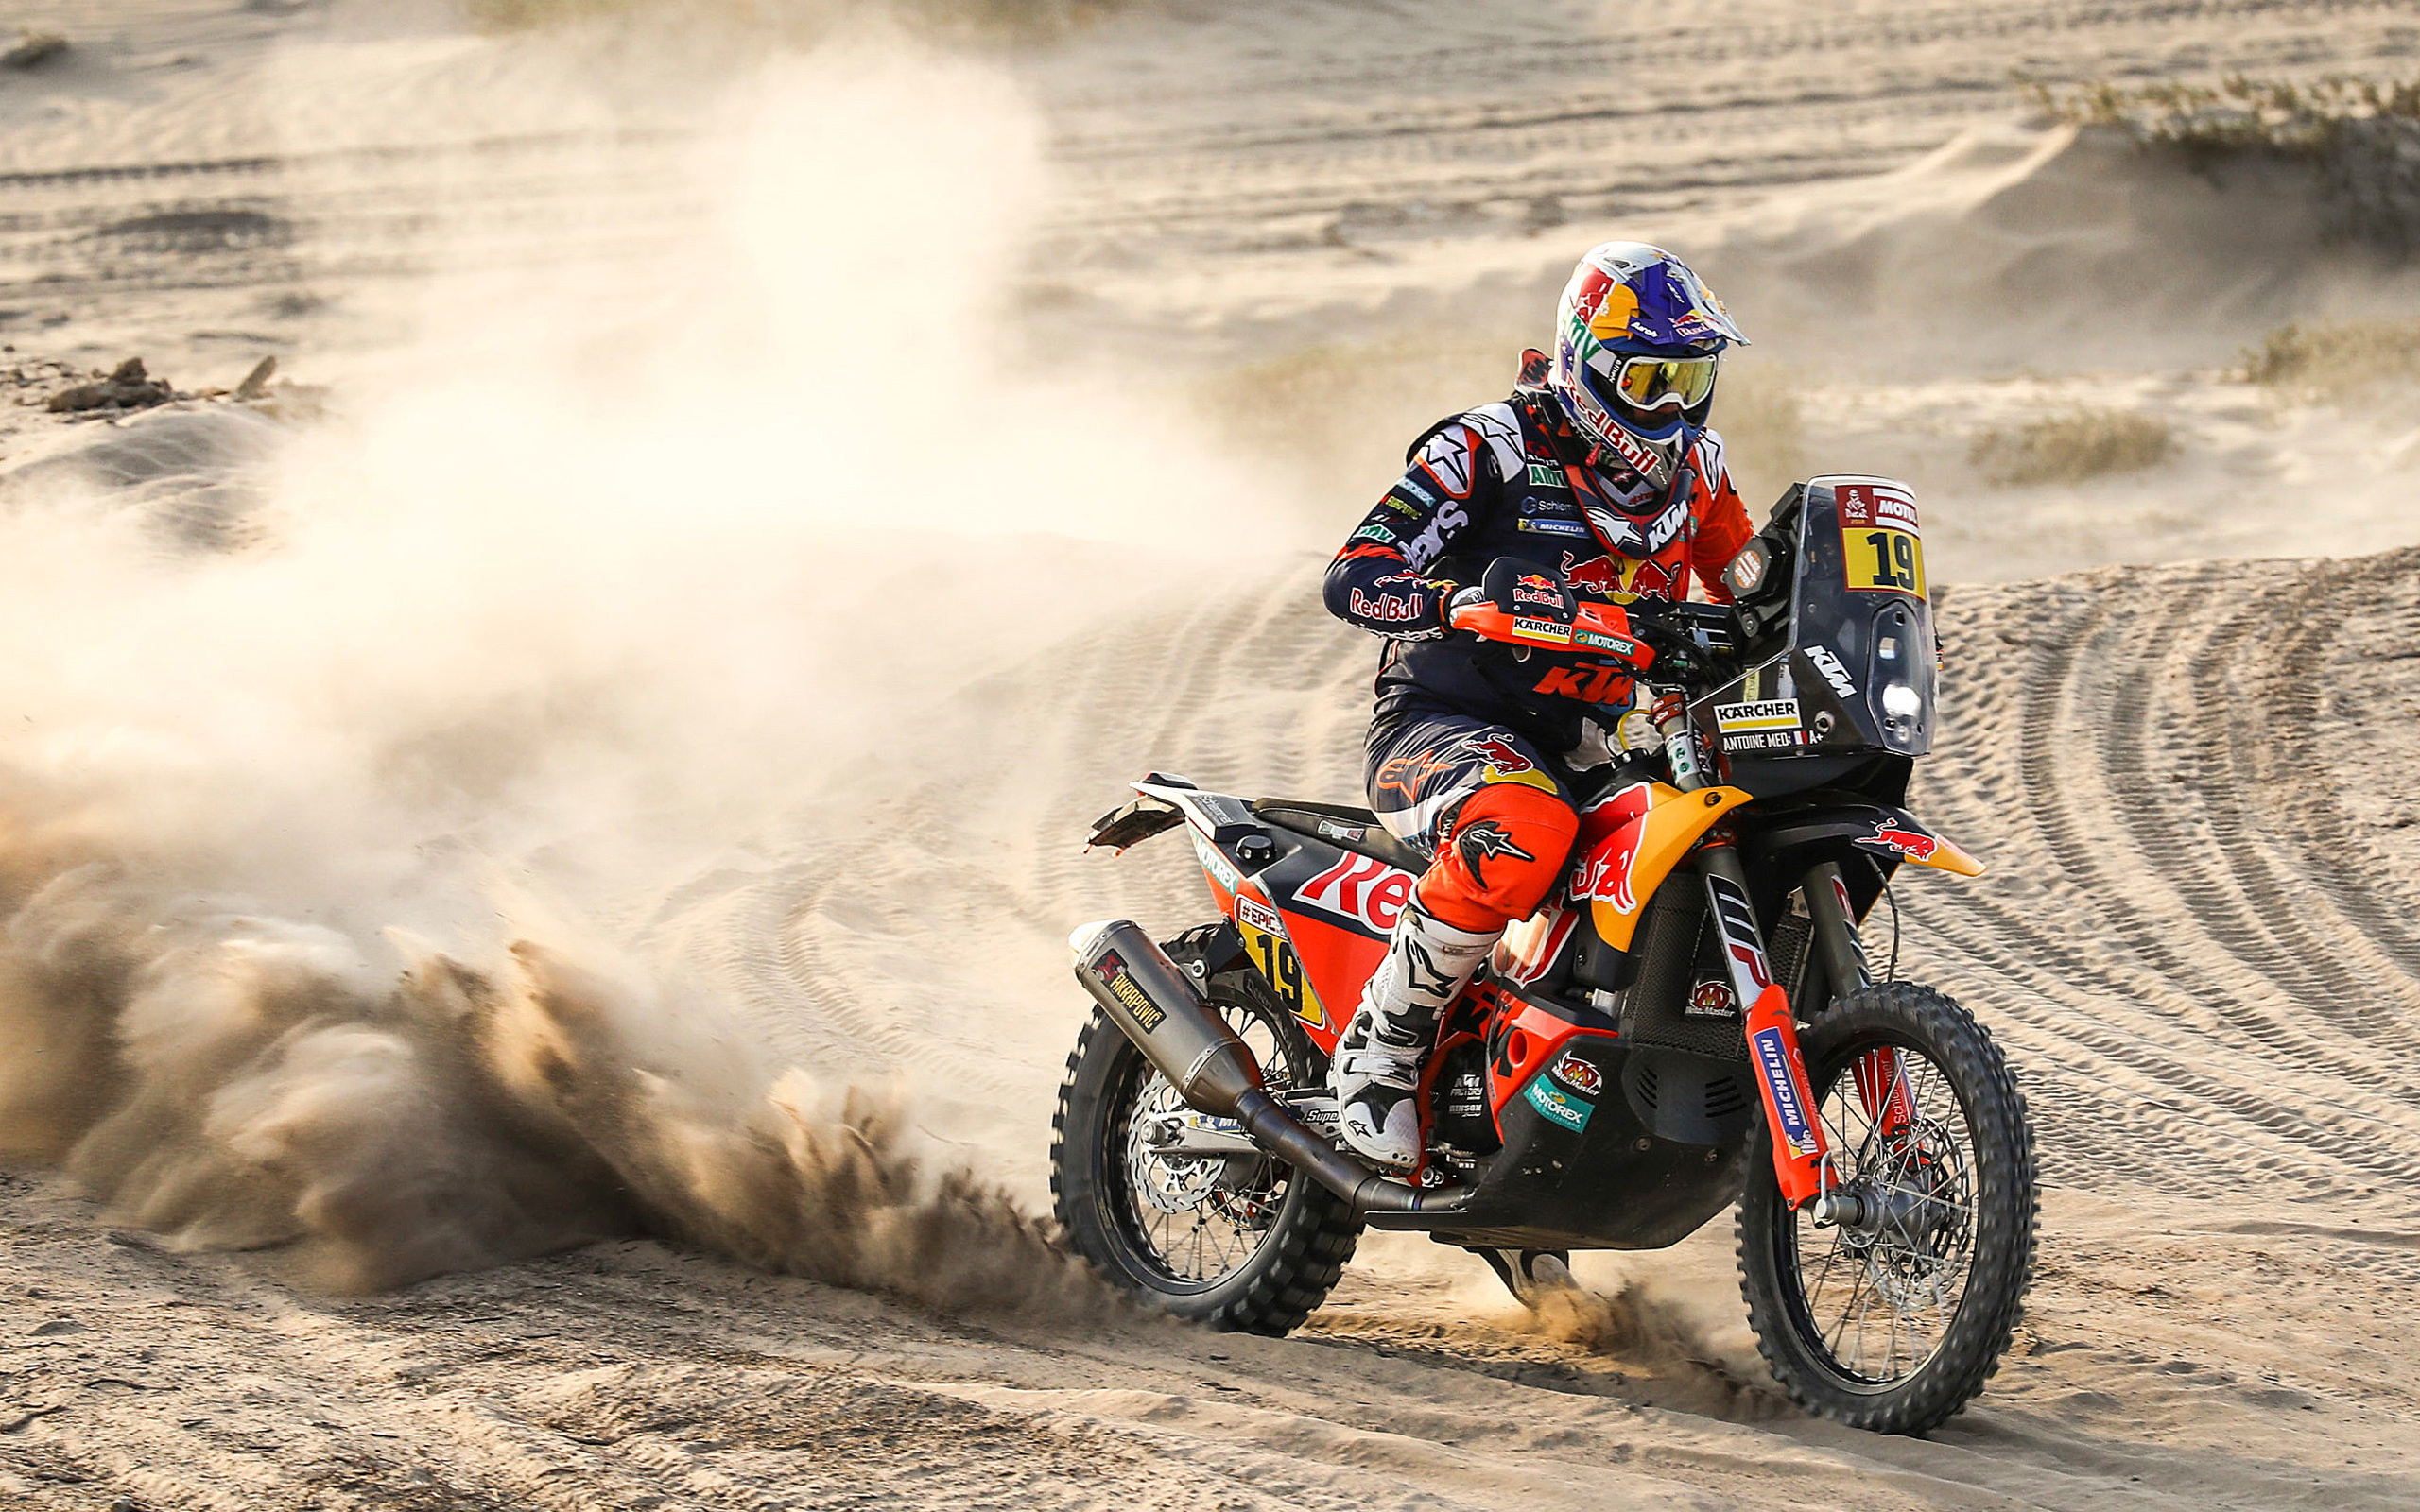 Dakar Rally: Antoine Meo, A French enduro rider and five-time world champion, Red Bull, KTM. 2560x1600 HD Wallpaper.